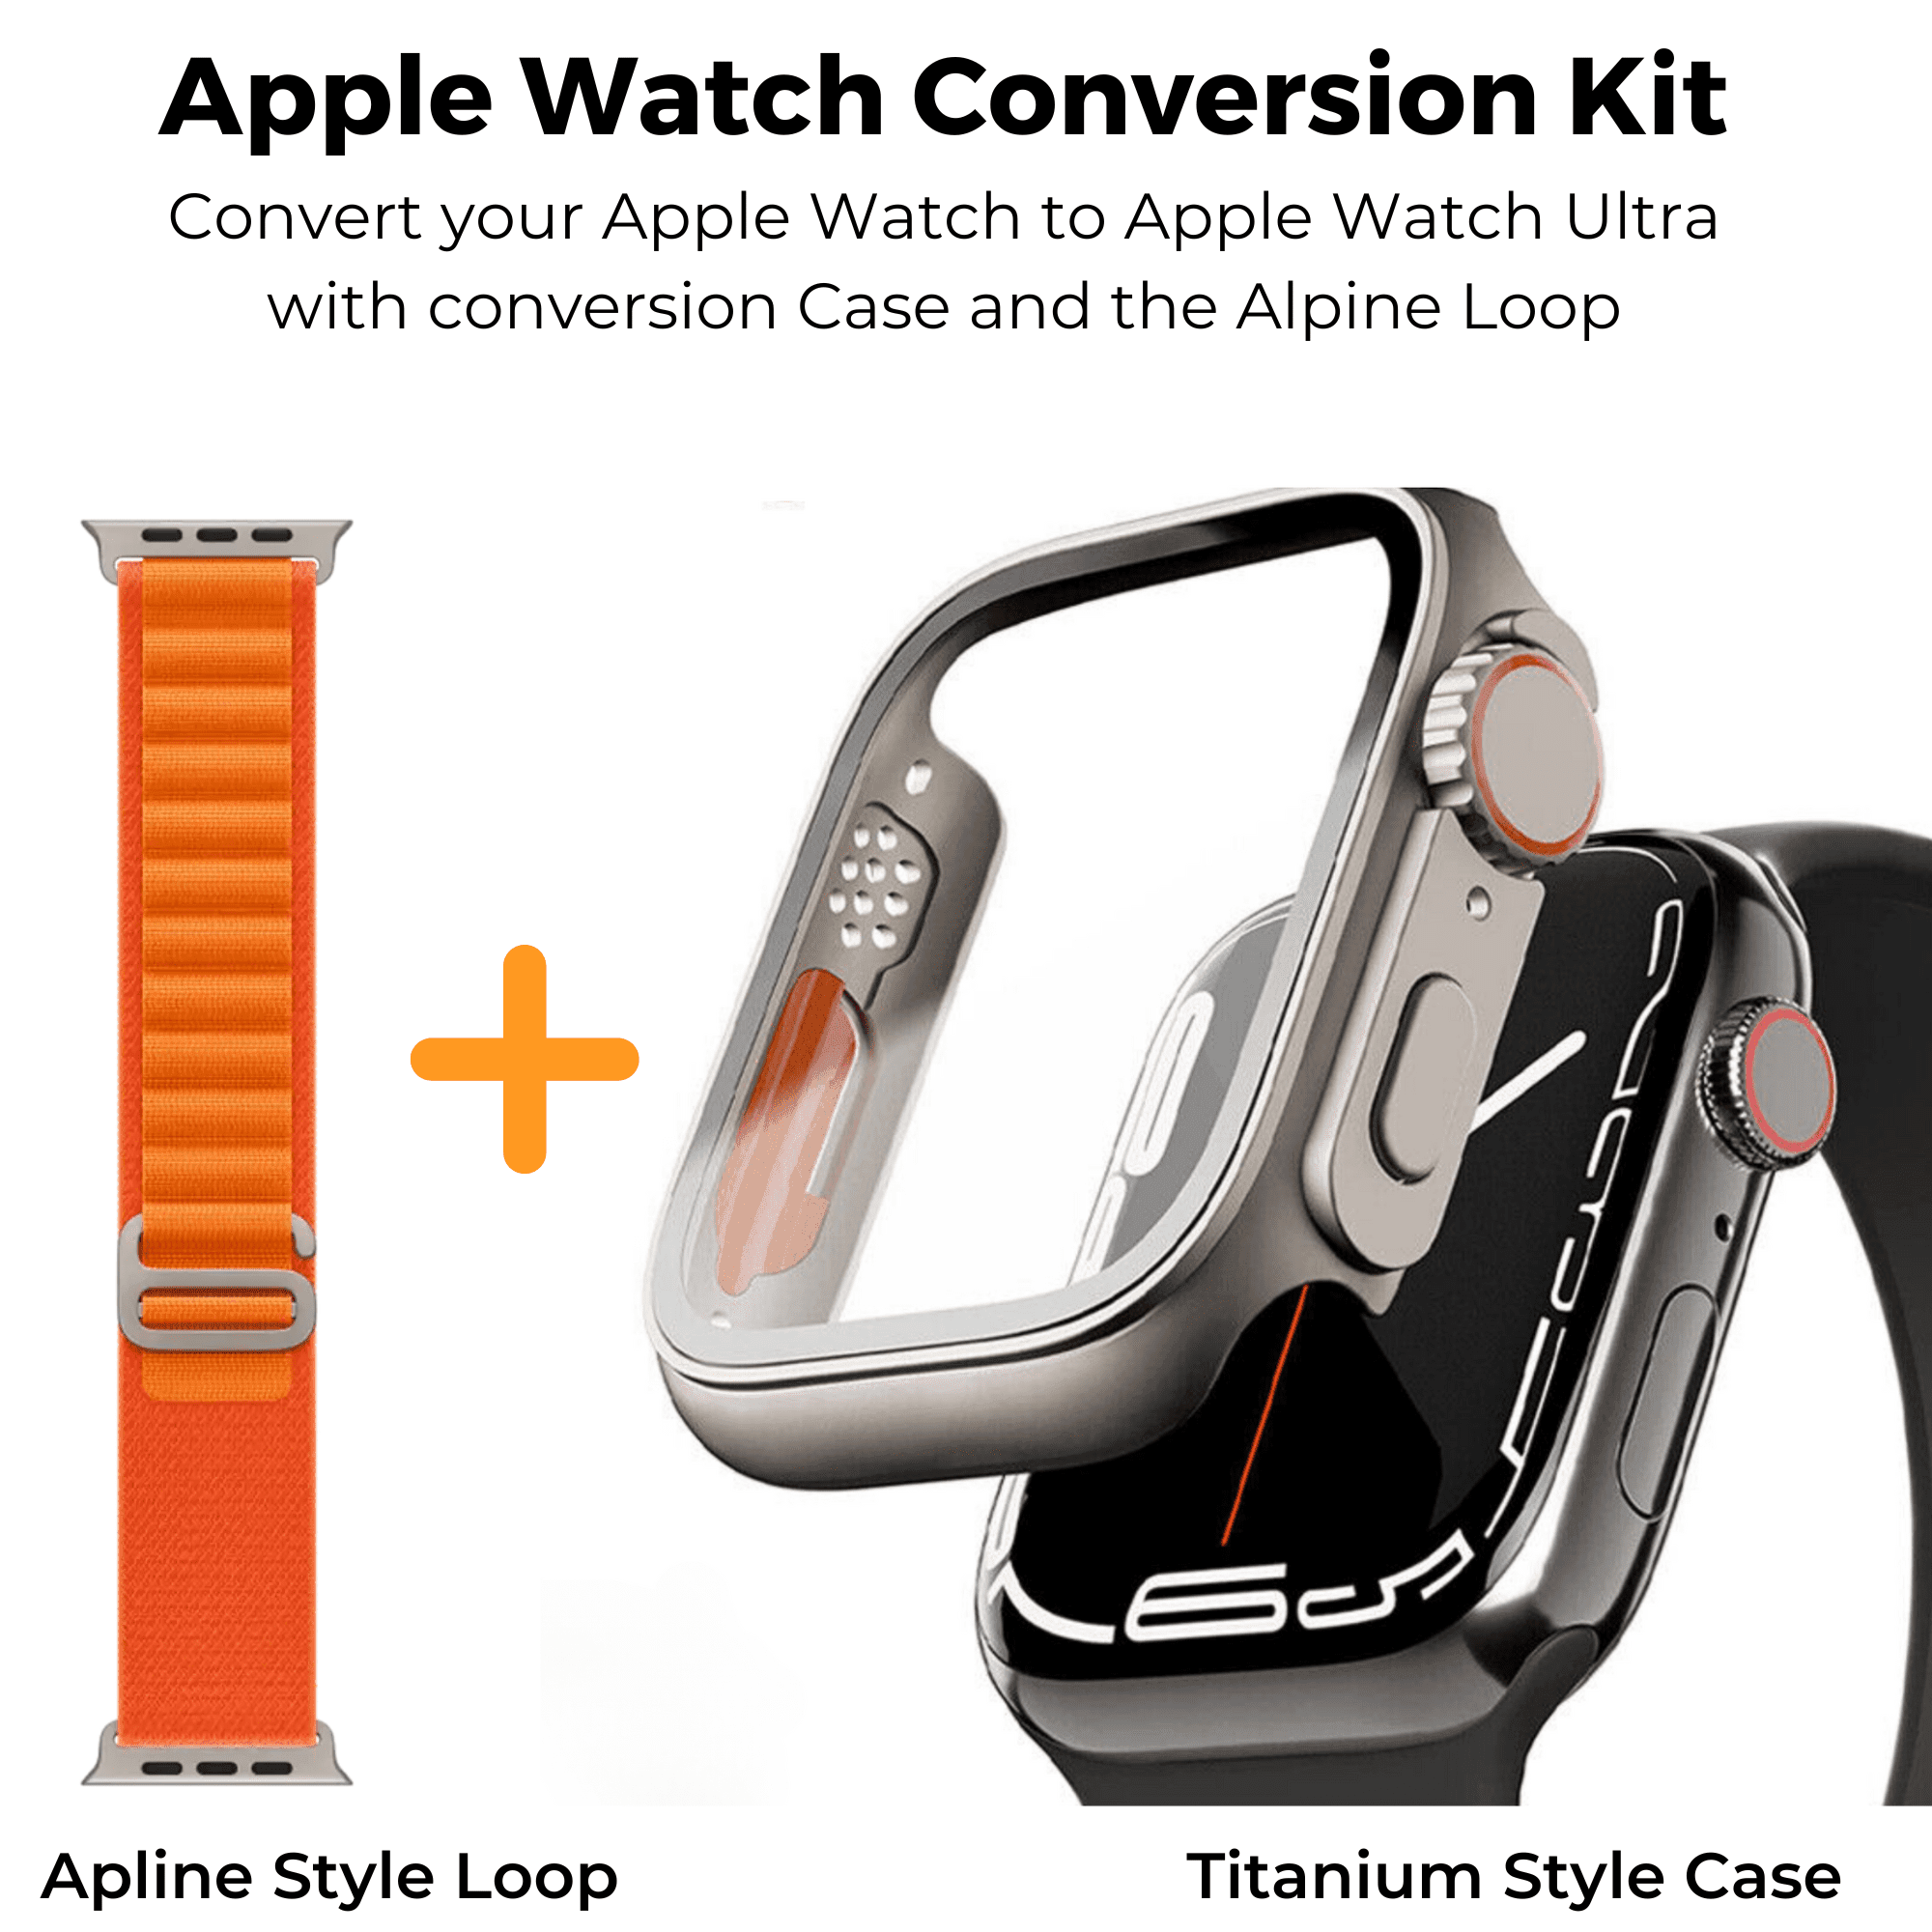 Conversion Kit for Apple Watch - Apple Watch 44 mm to Apple watch Ultra 49 mm: Titanium Style Case + Alpine Loop Band… mod kits india dream watches apple watch